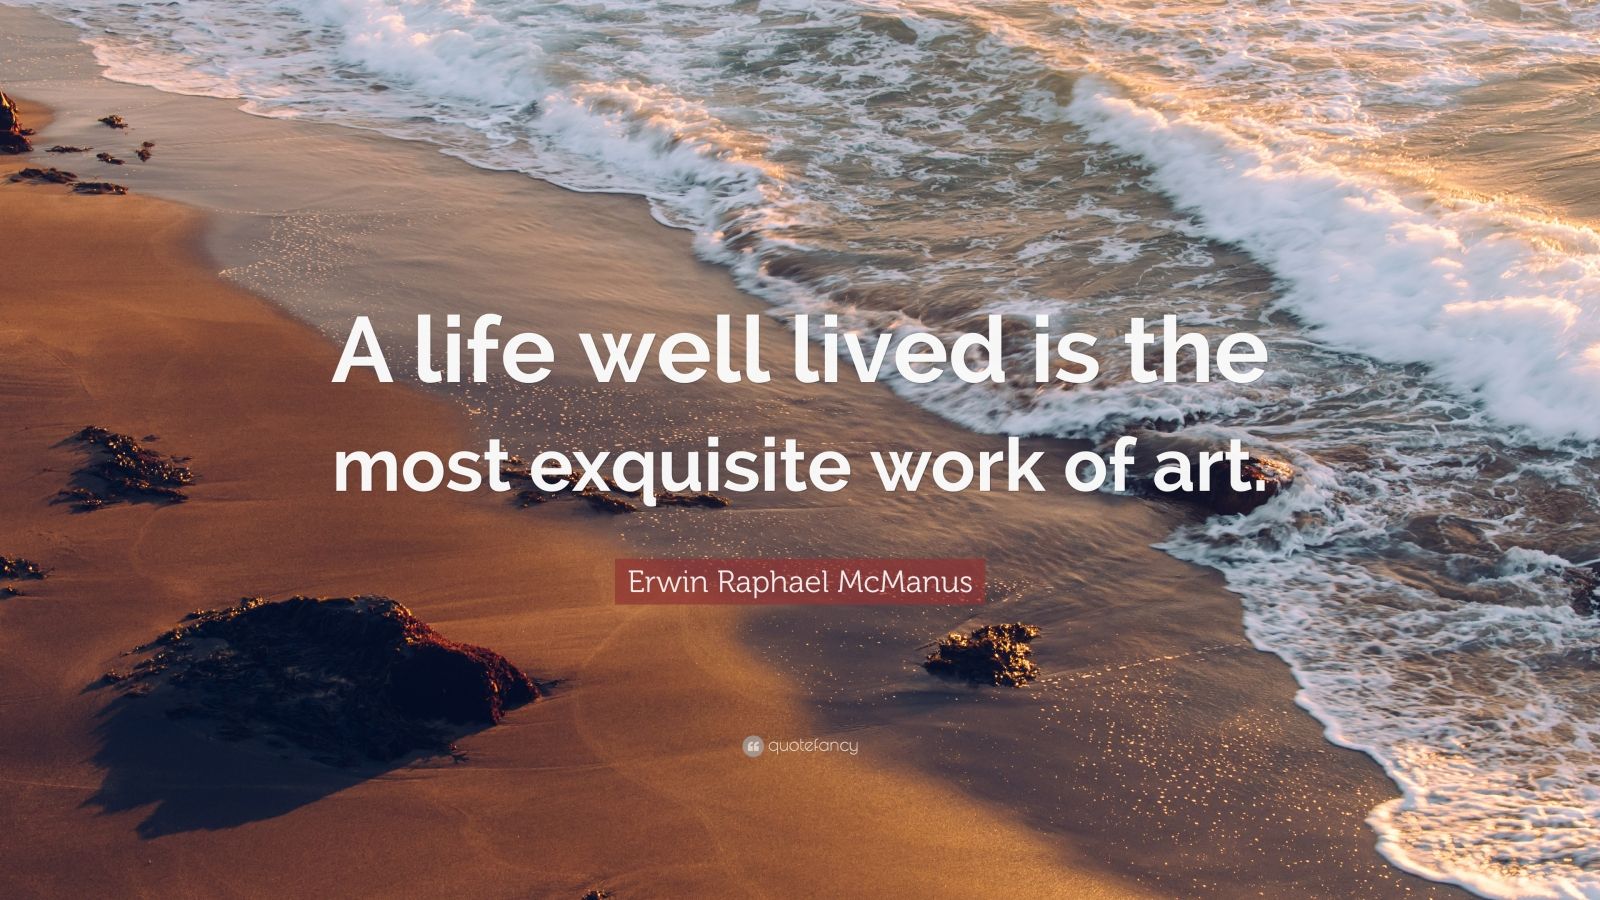 Erwin Raphael McManus Quote: “A life well lived is the most exquisite